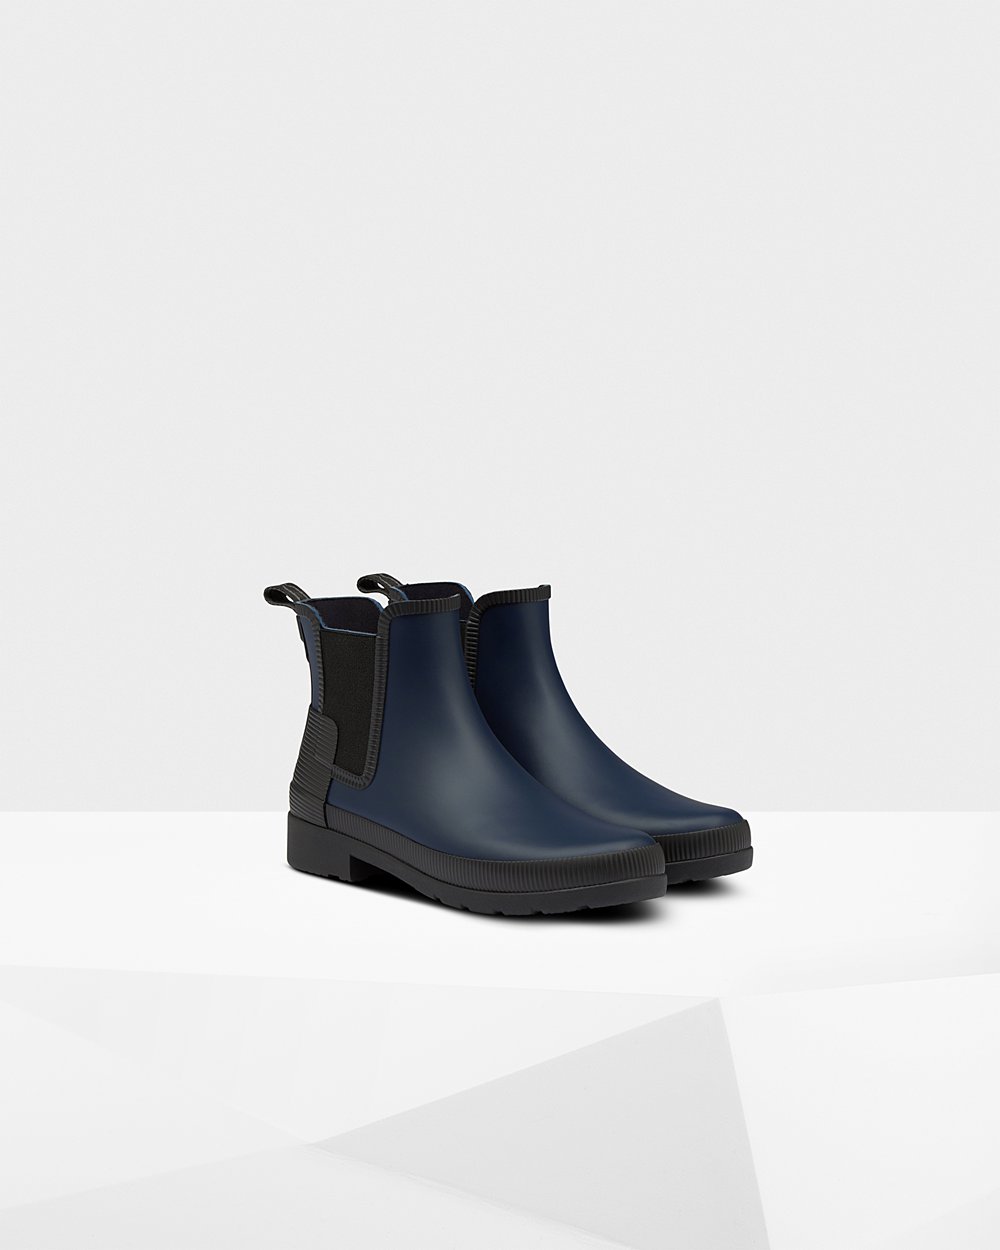 Womens Chelsea Boots - Hunter Refined Texture Block Slim Fit (54YLUWVQR) - Navy/Black